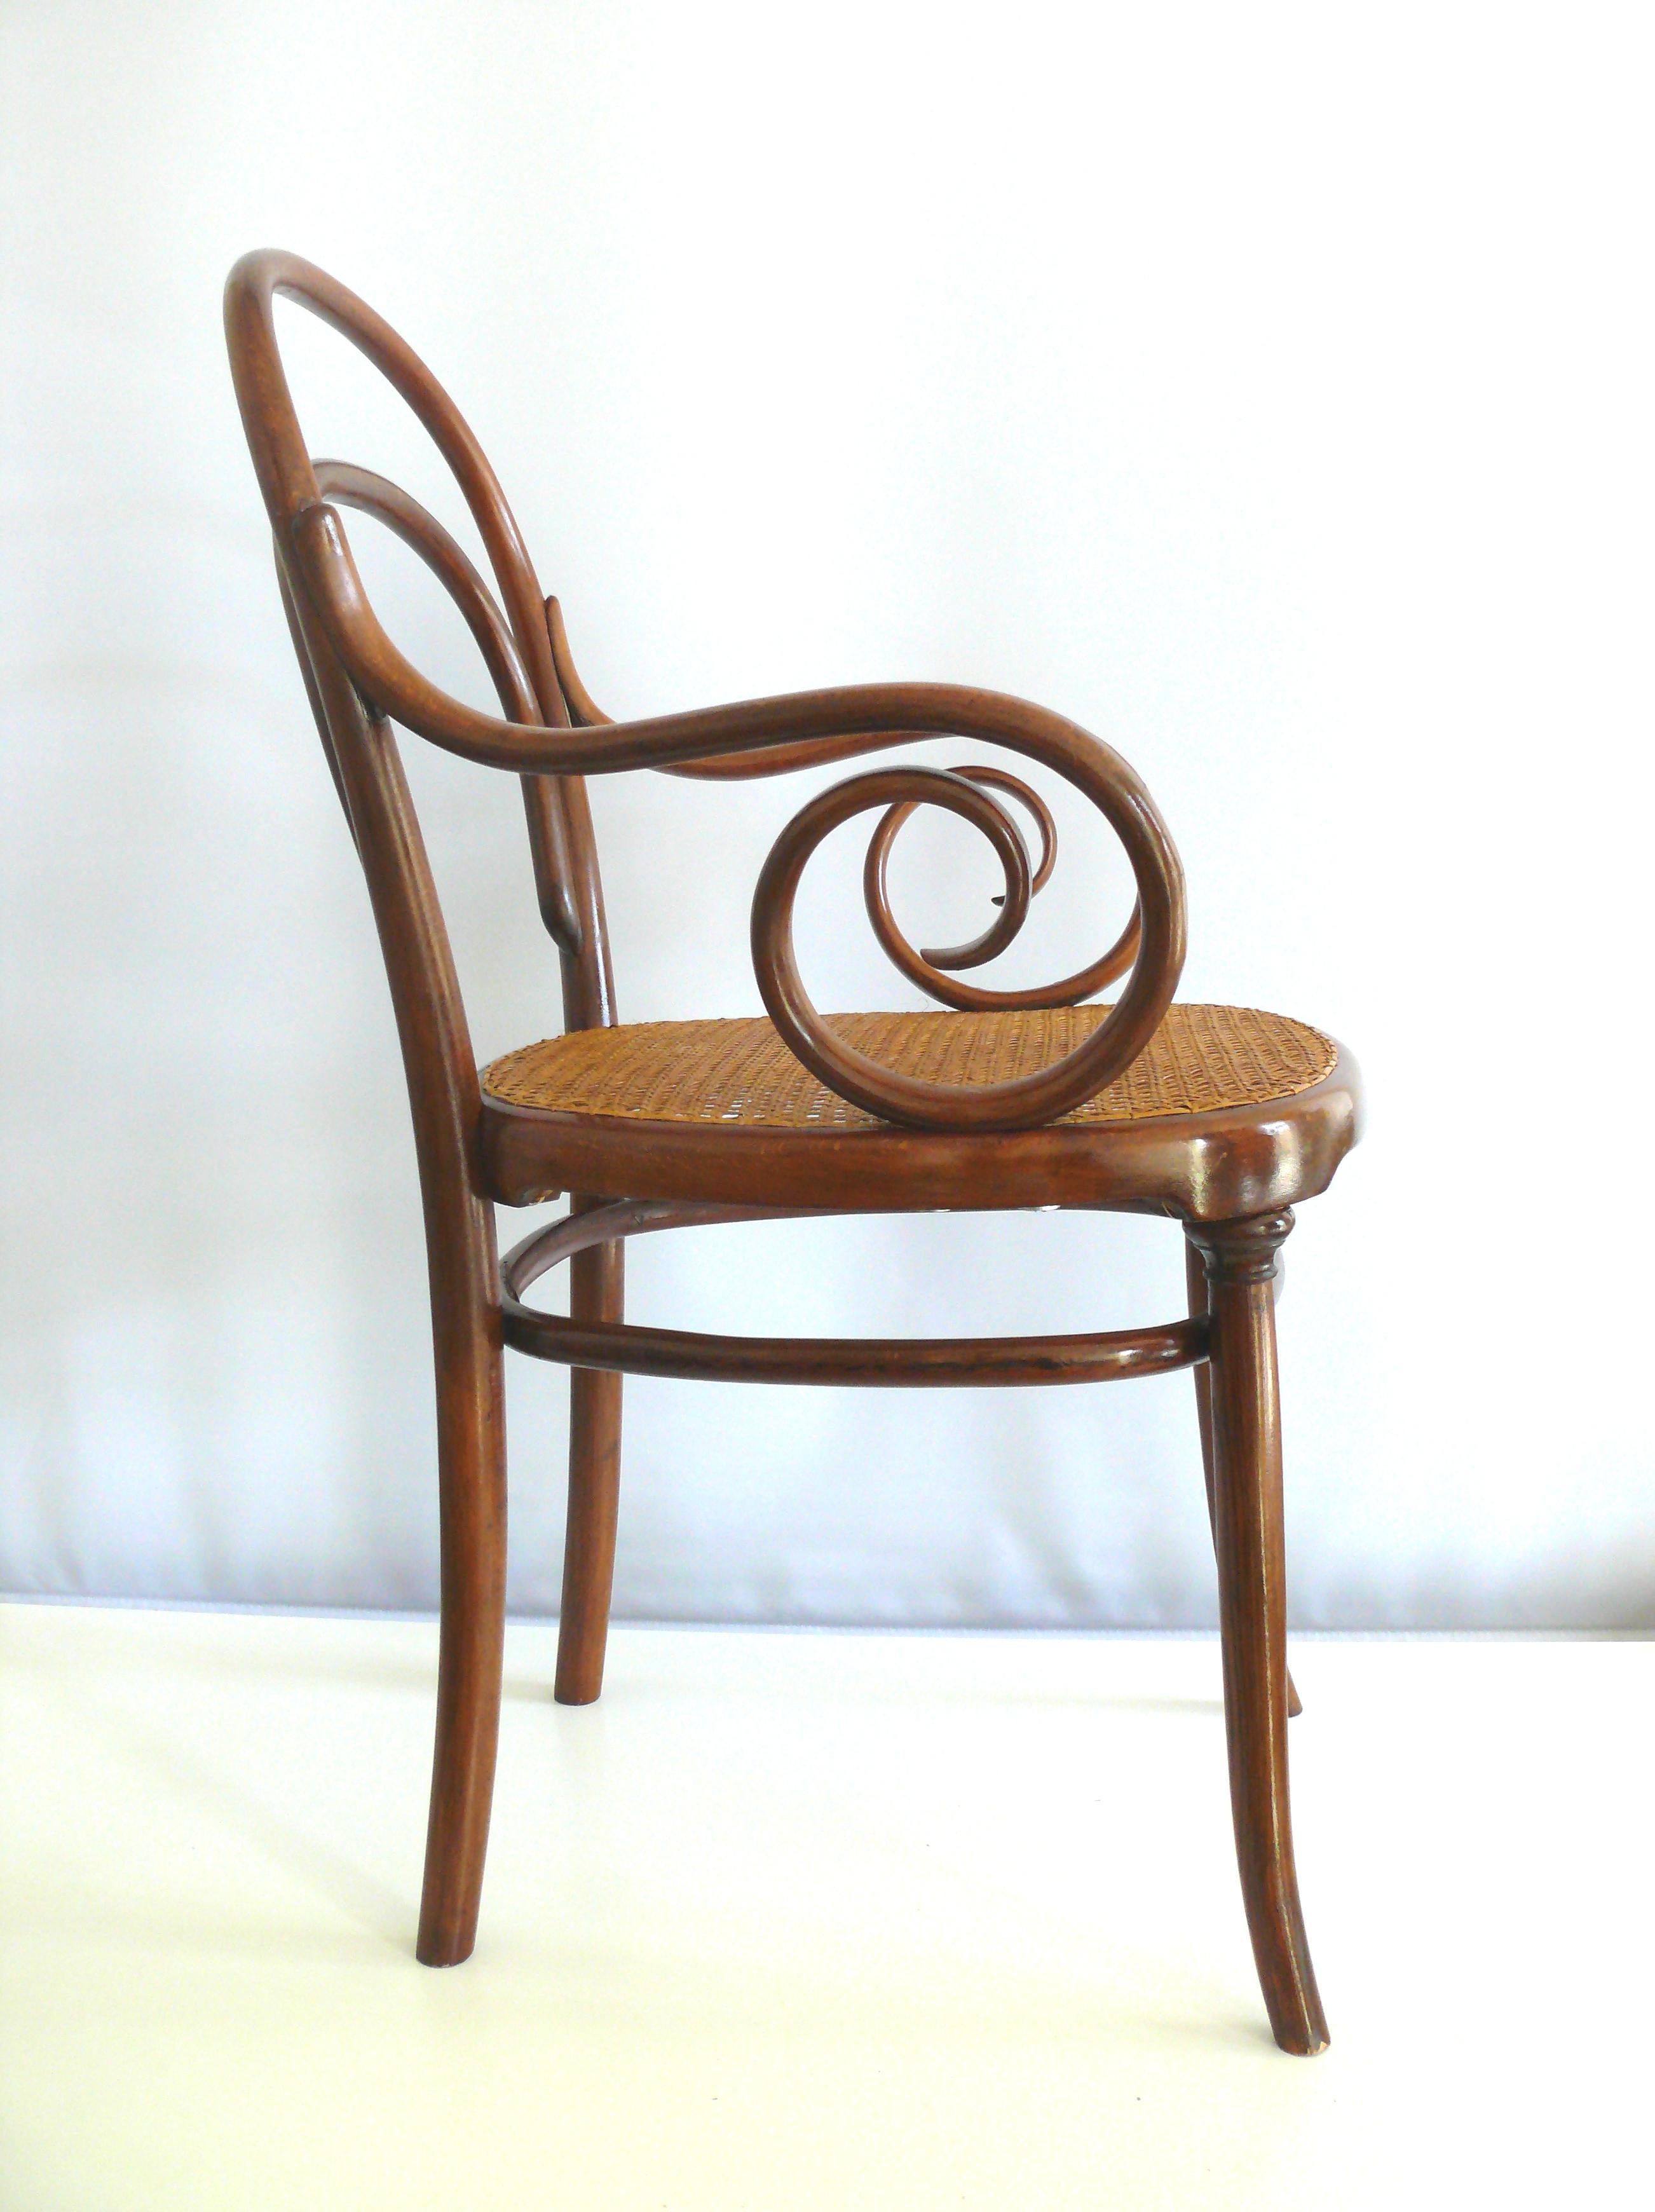 High-quality collector's item: Antique bentwood armchair with attached snail-shaped armrests, between 1862 and 1870. Thonet - Vienna, armchair no. 8 - design Michael Thonet. There are three proofs of manufacture on the chair: paper label, embossed